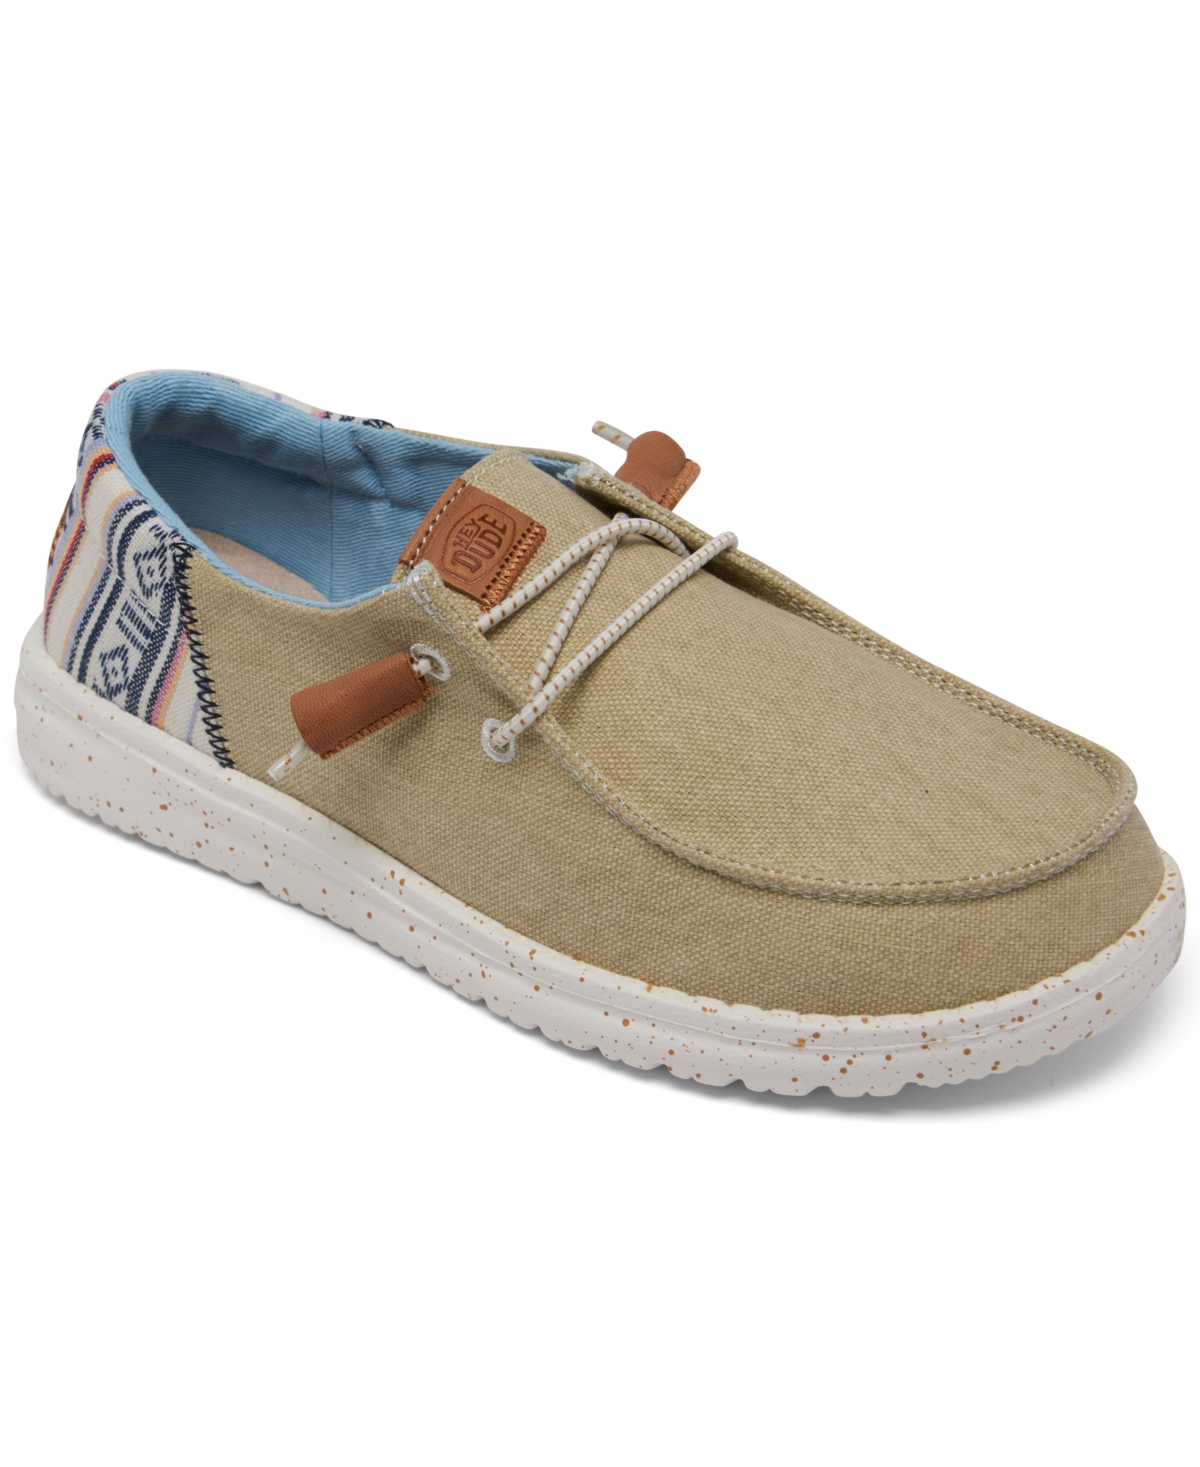 Women's Wendy Funk Casual Moccasin Sneakers from Finish Line - Natural